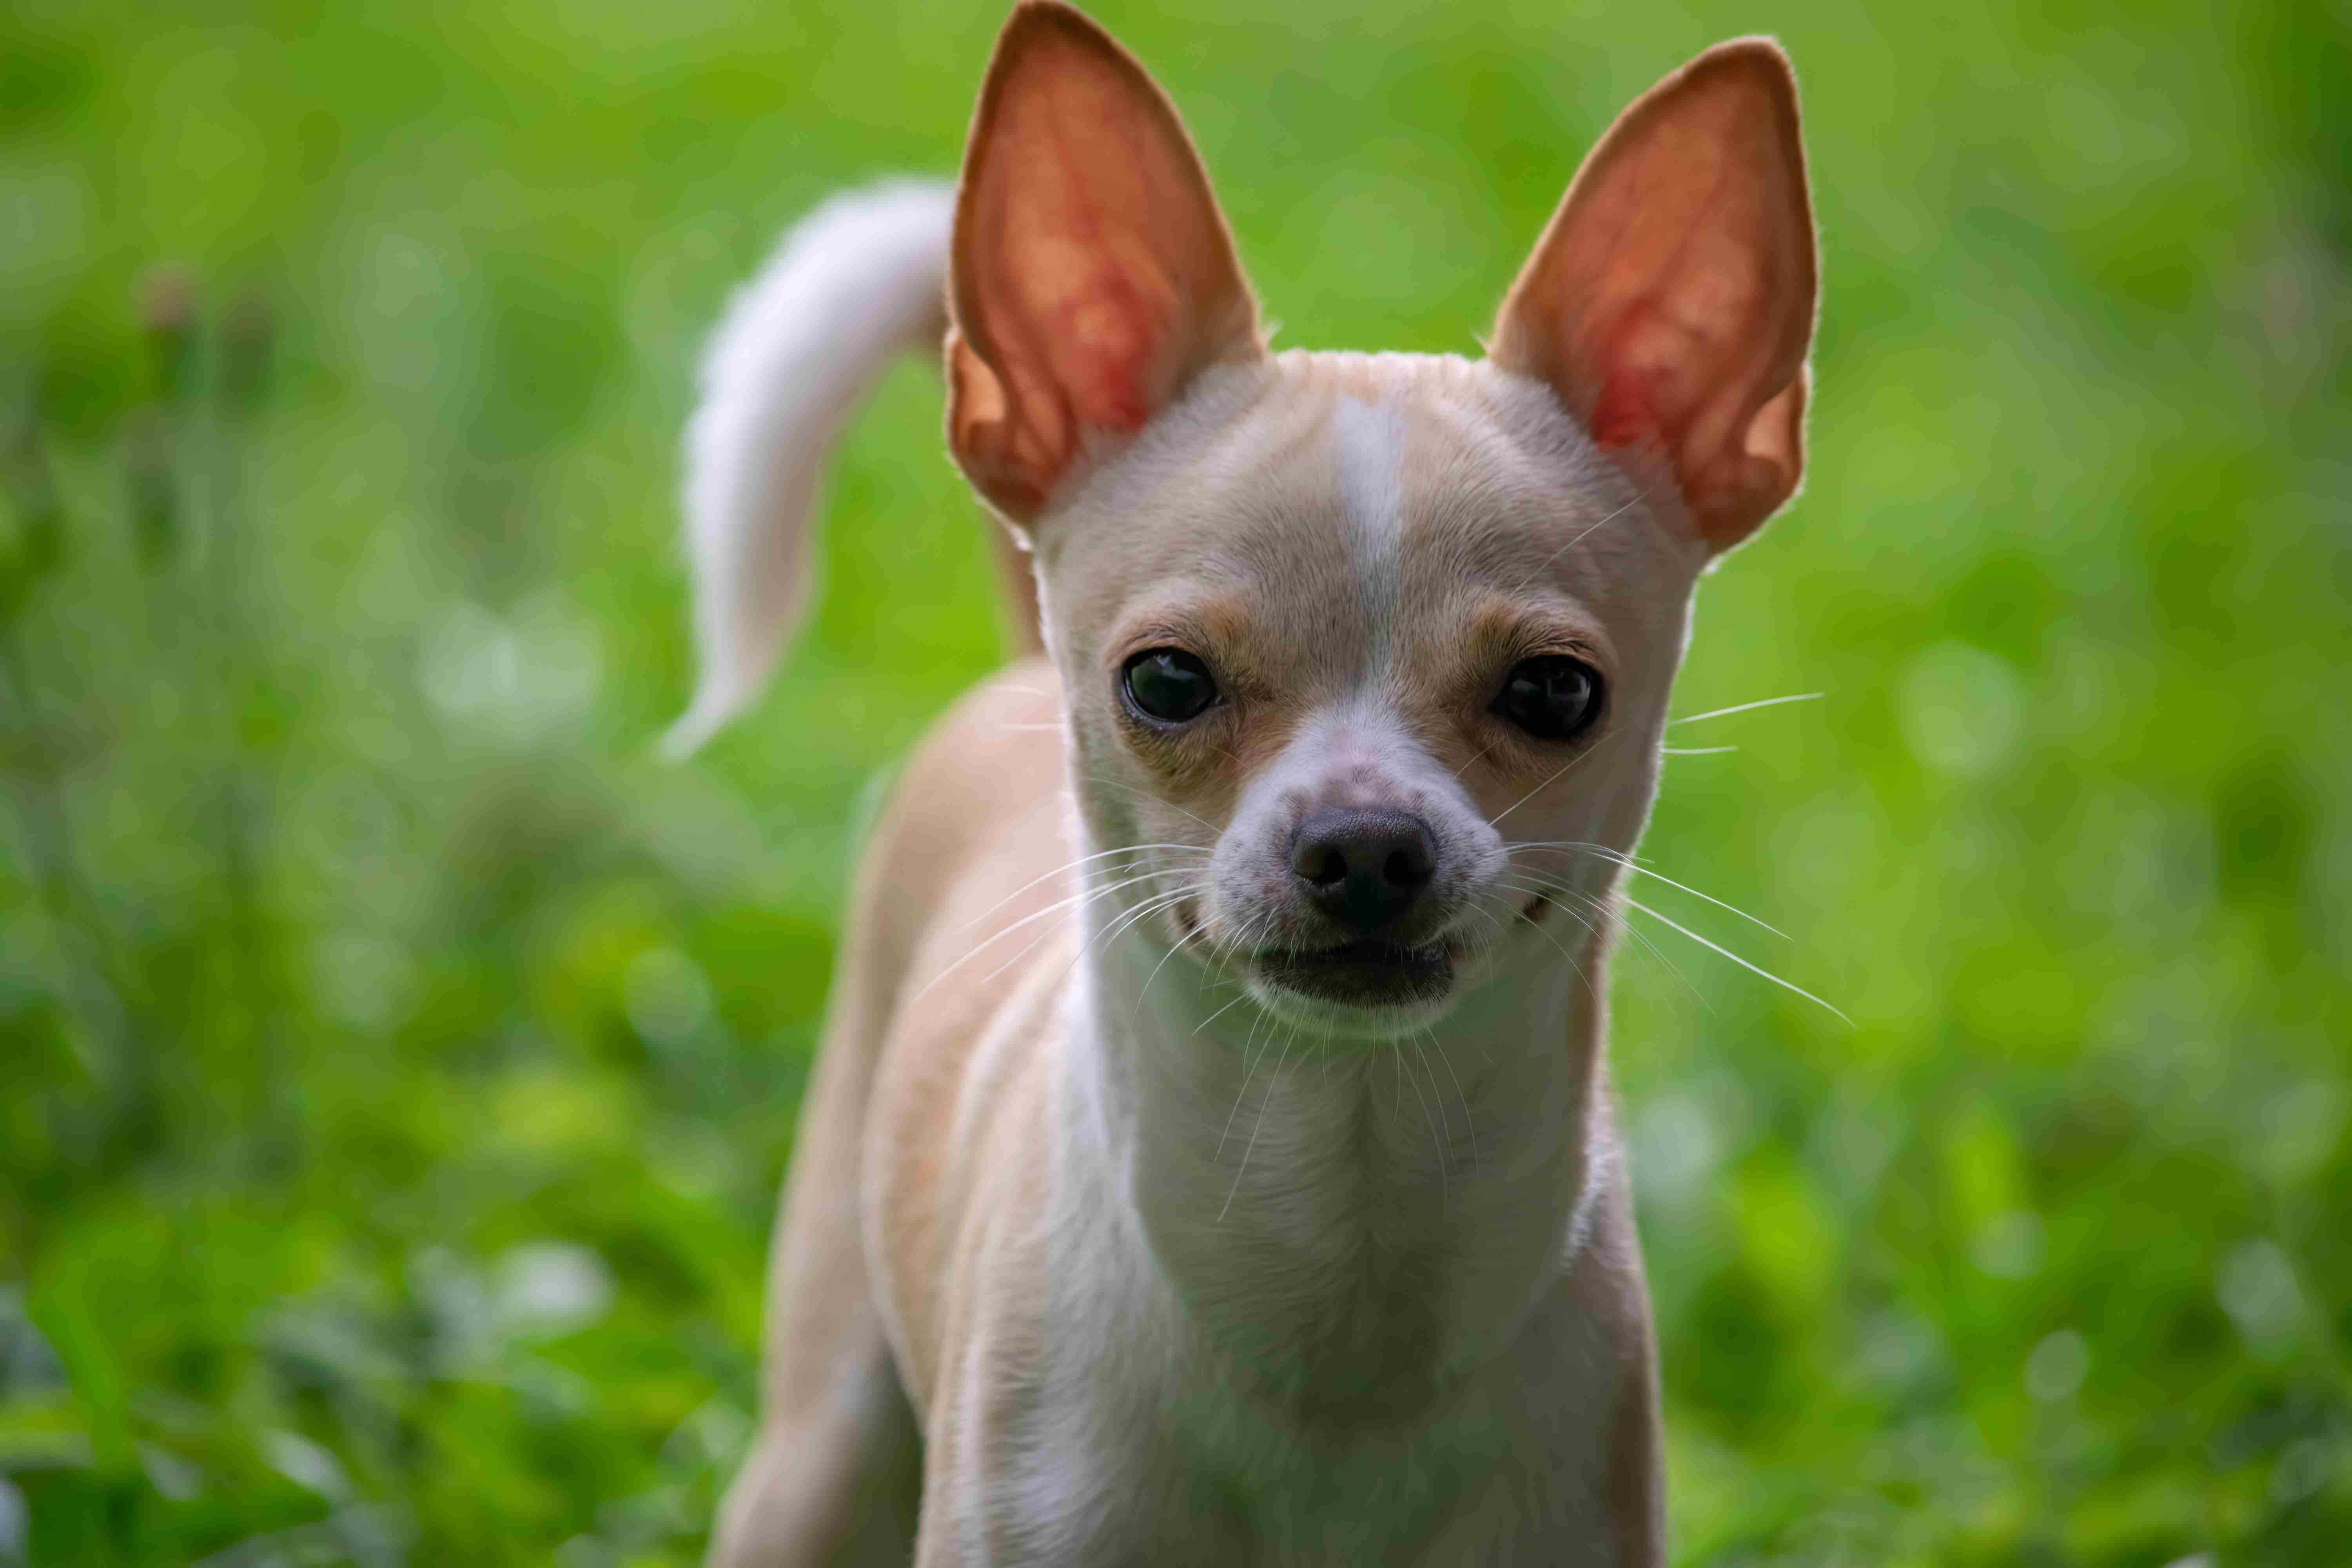 How can you train a Chihuahua to respond appropriately to strangers or unfamiliar situations?